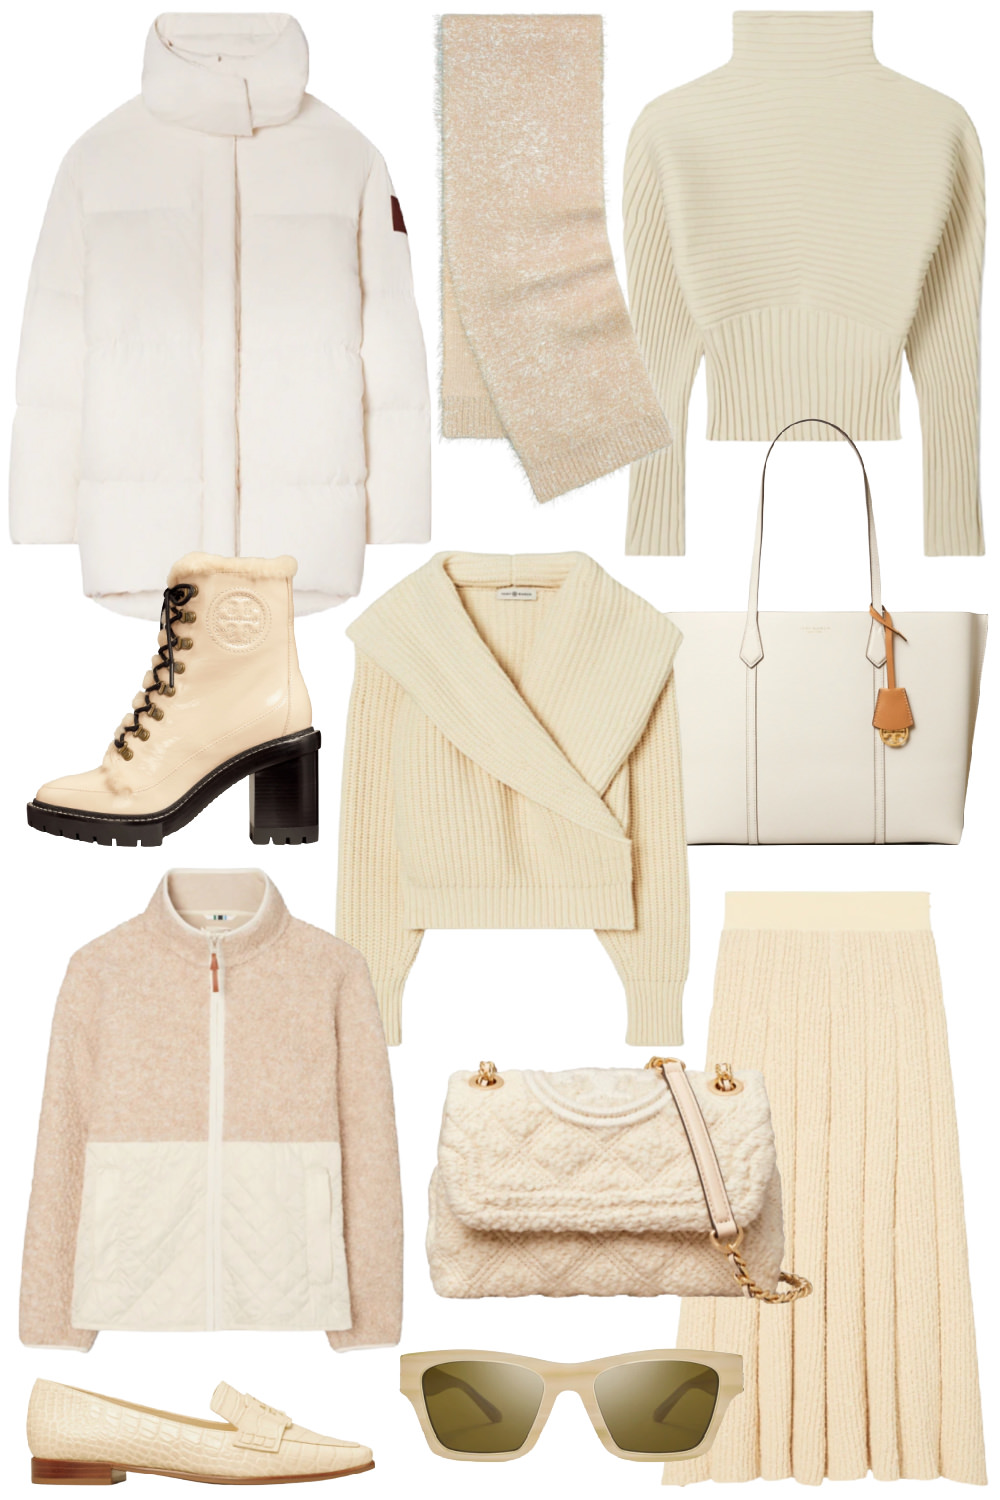 10 Winter Whites On Sale at Tory Burch | Natalie Yerger